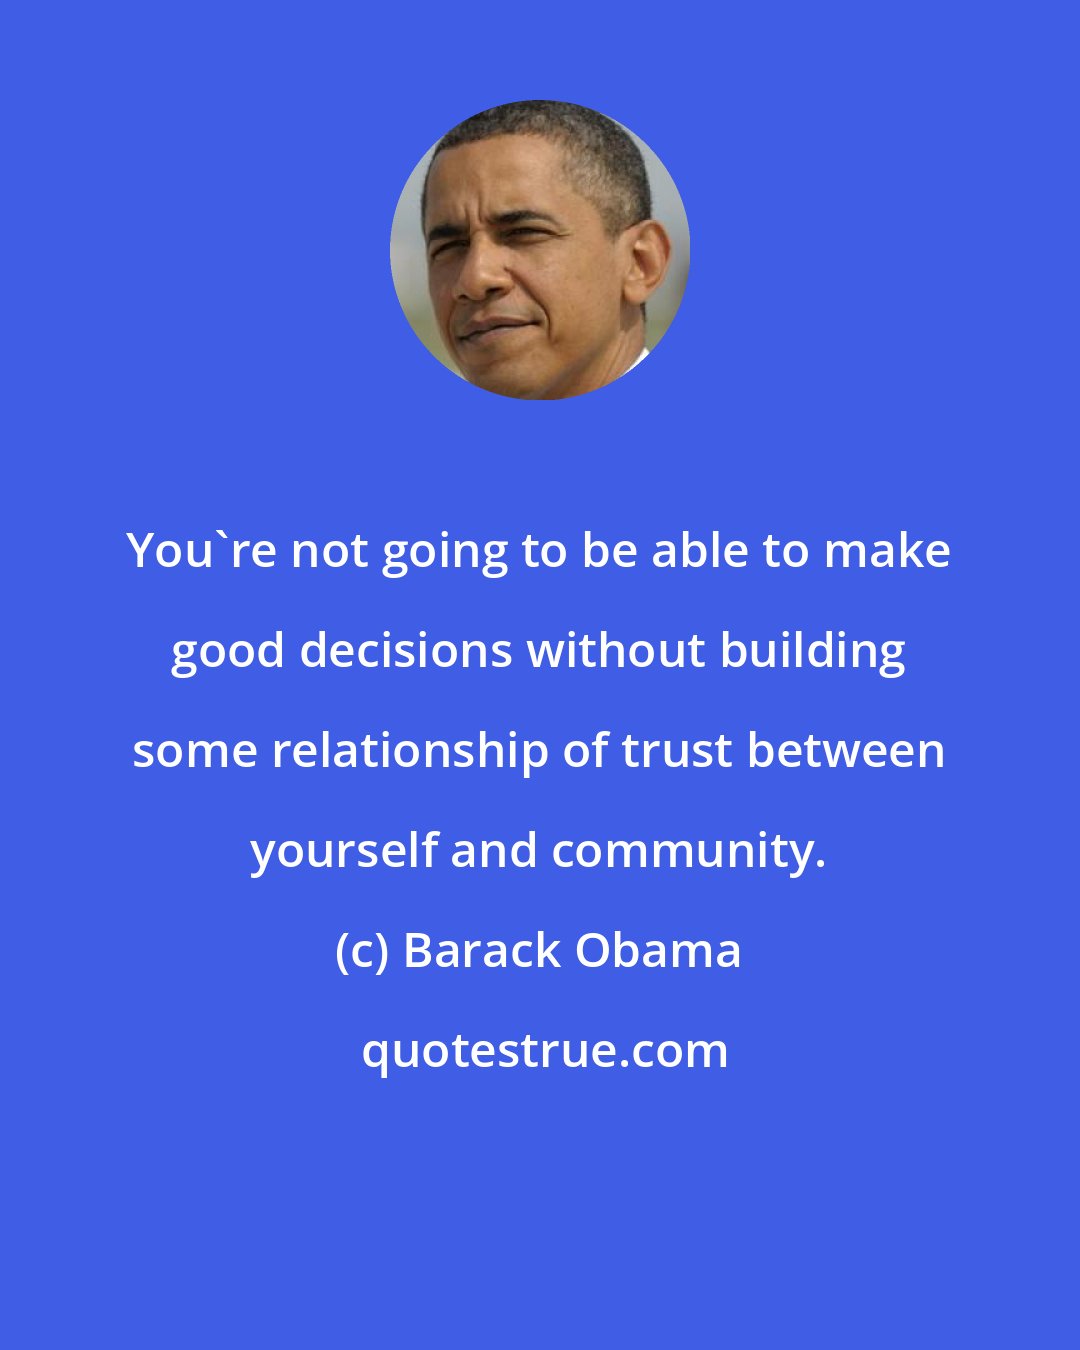 Barack Obama: You're not going to be able to make good decisions without building some relationship of trust between yourself and community.